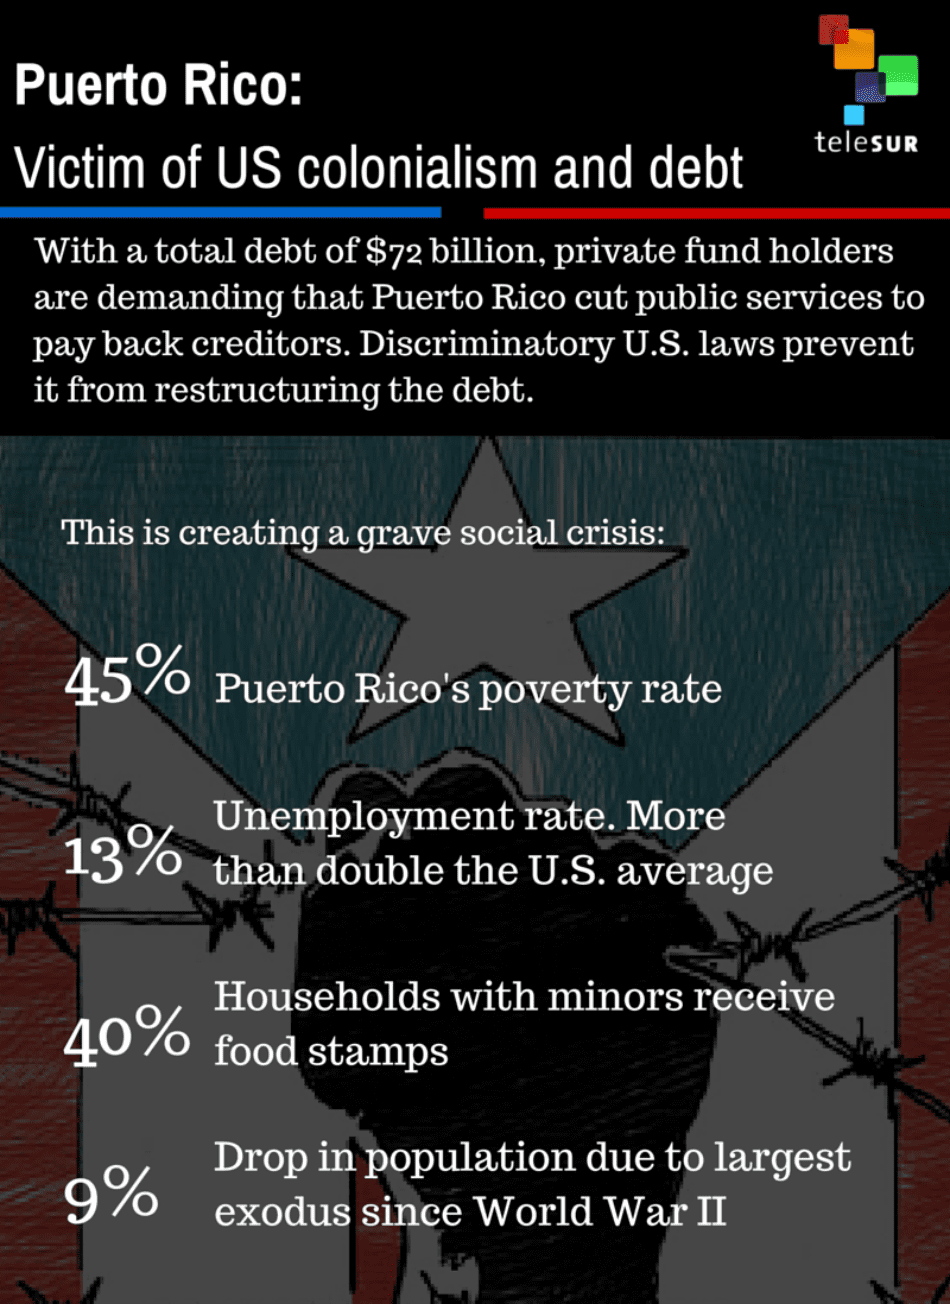 Puerto Rico: A Victim of US Colonialism and Debt